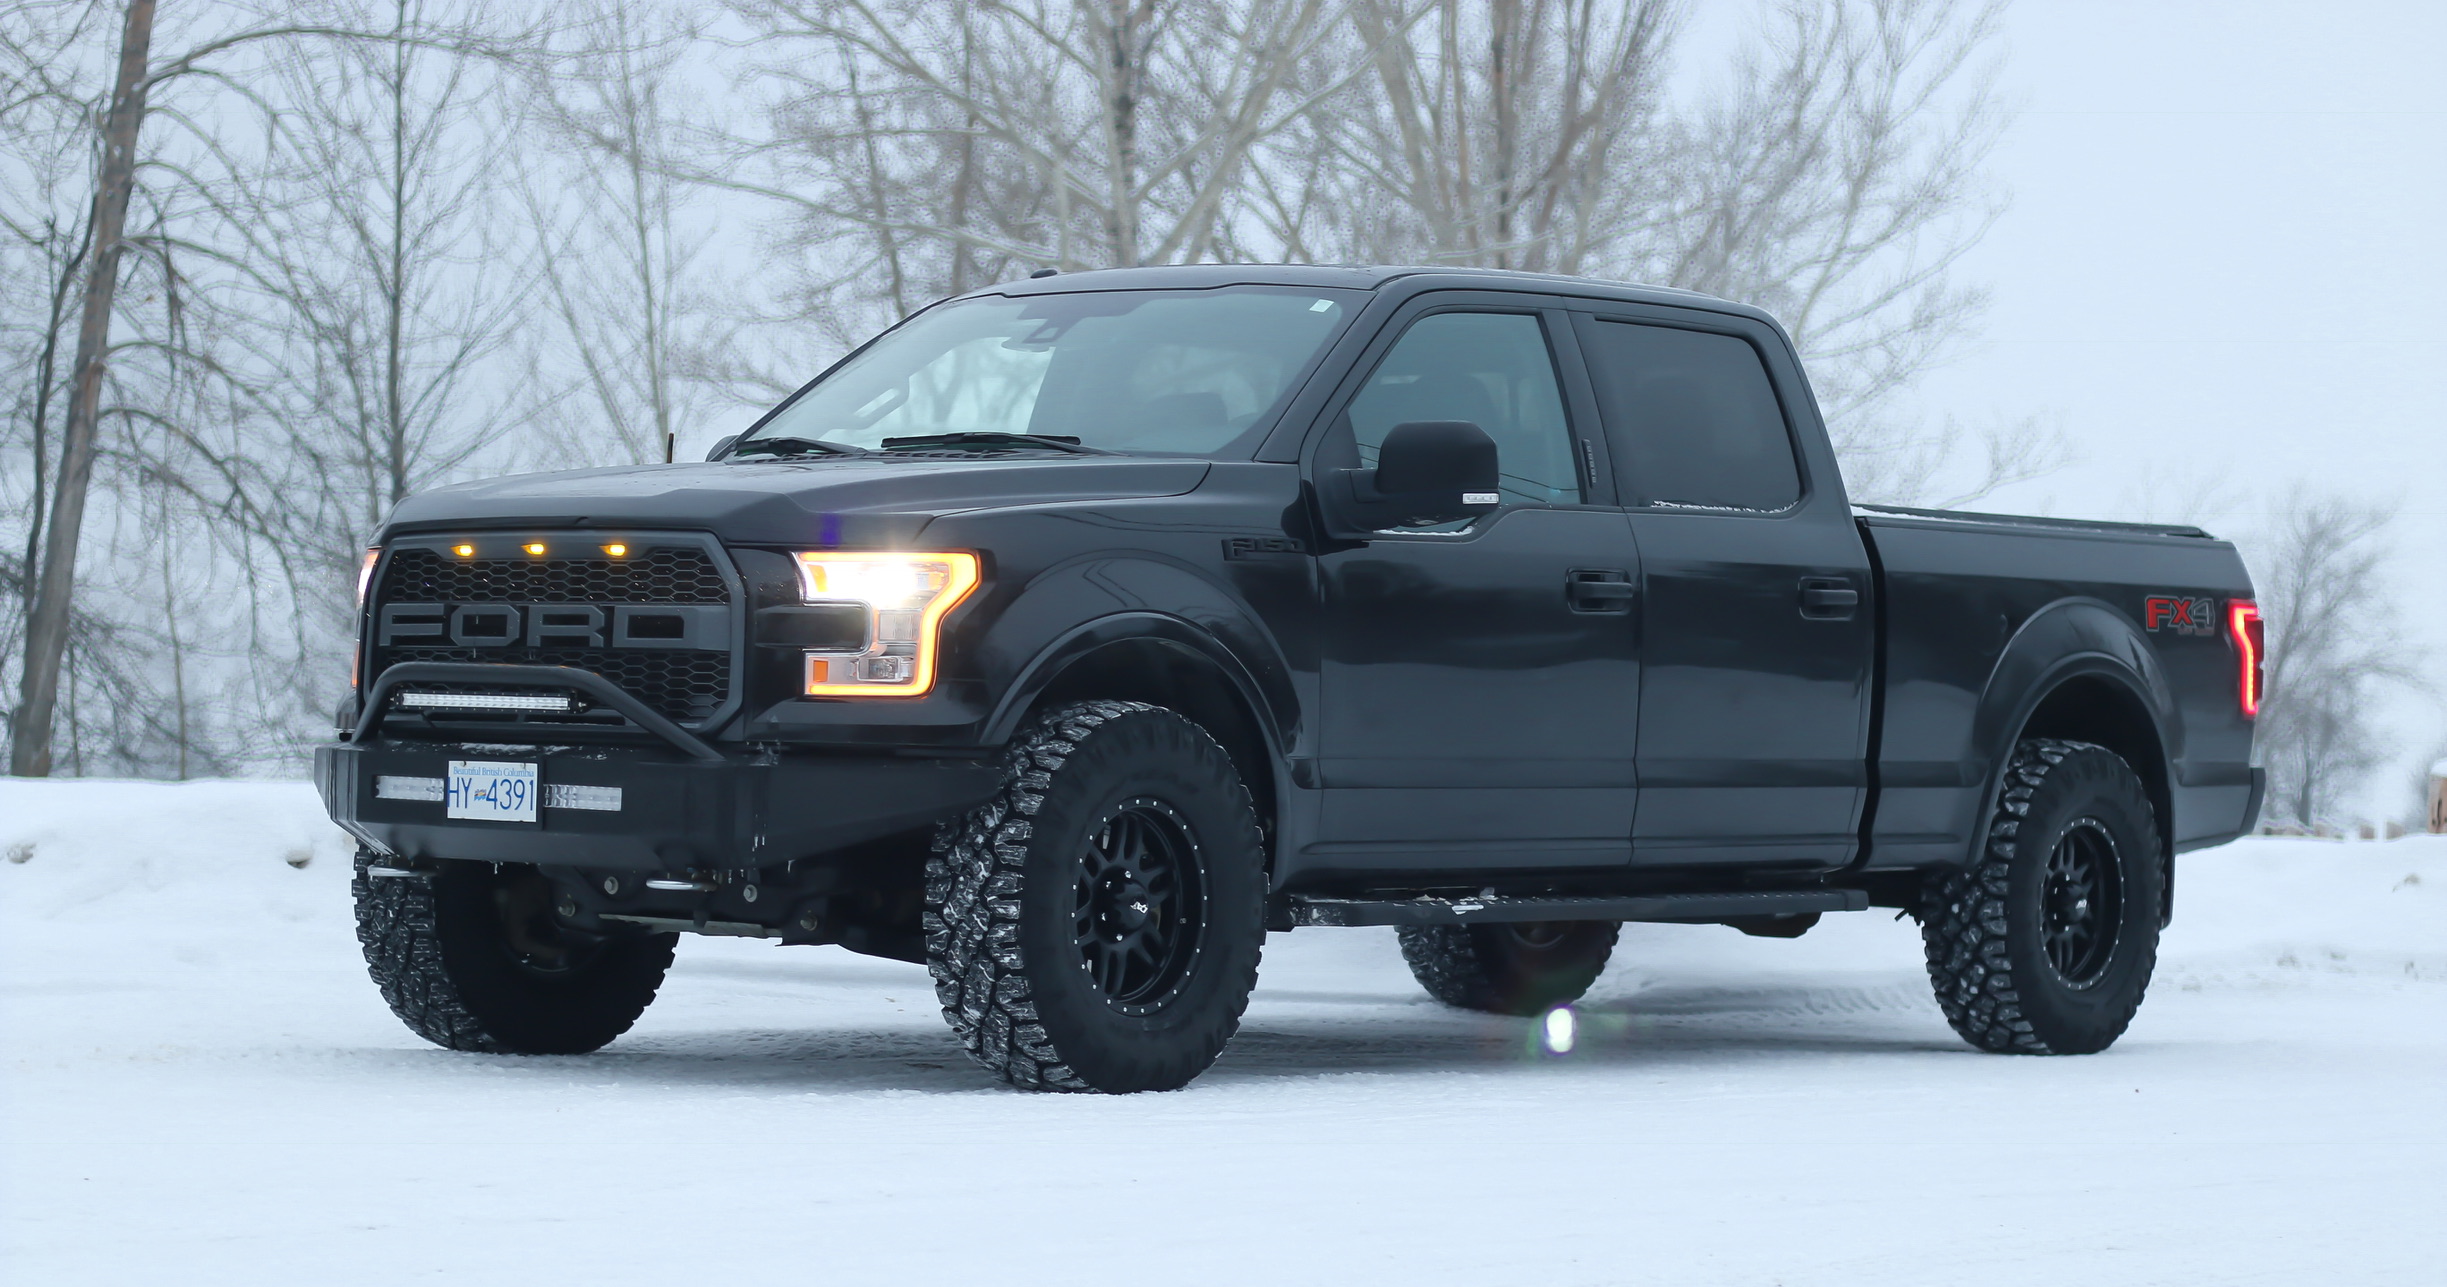 THE Black F150 Photo Thread Page 58 Ford F150 Forum Community of